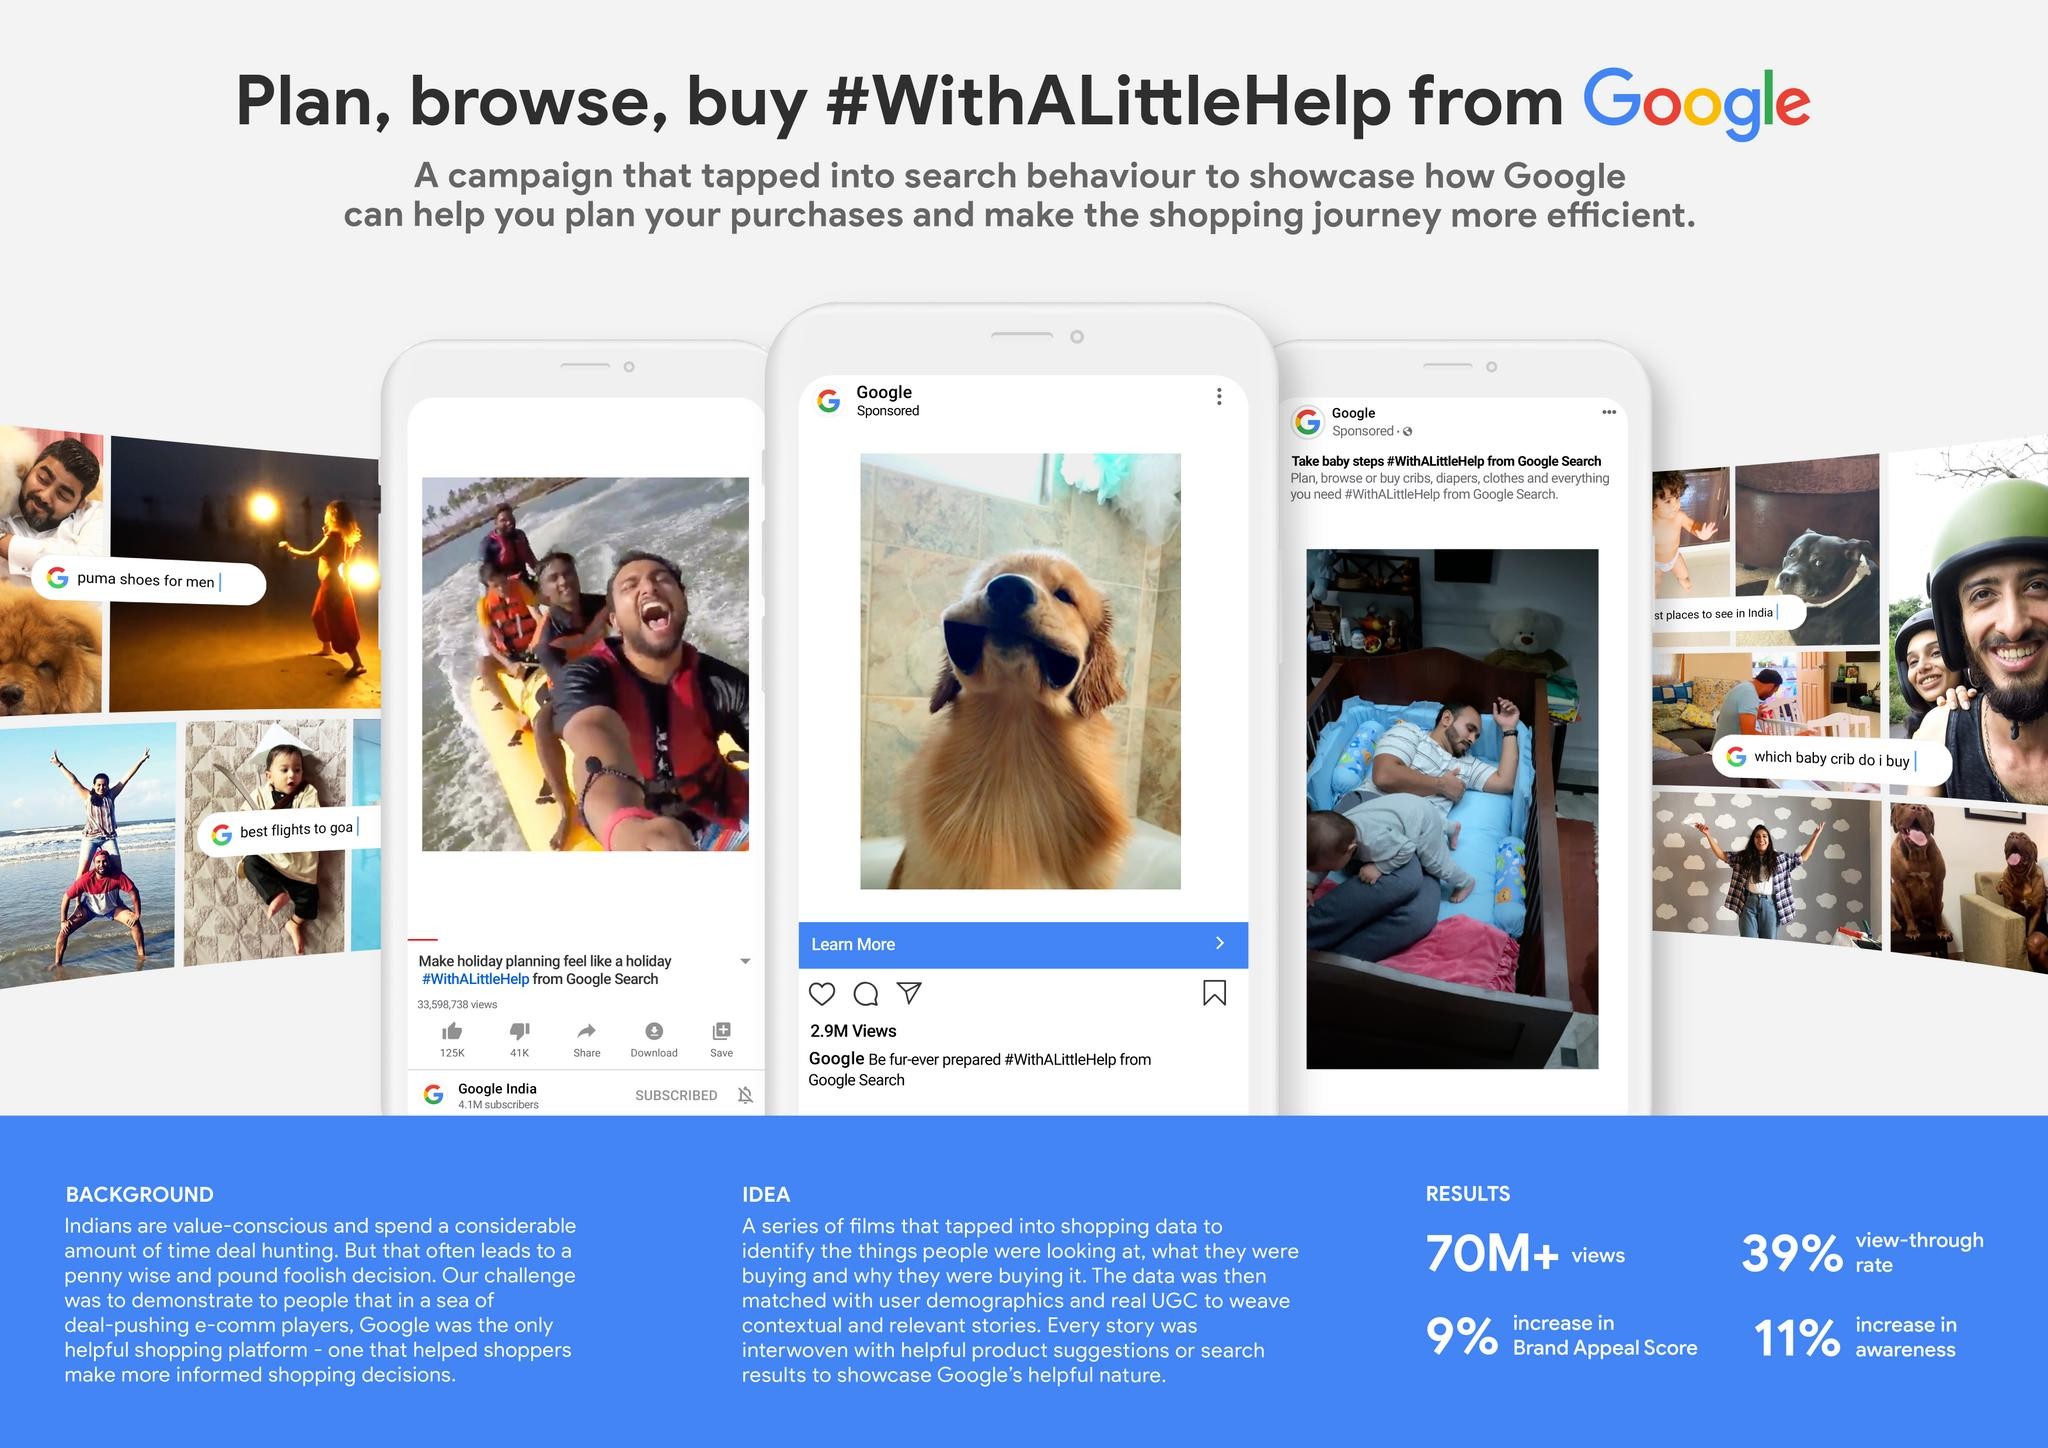 Plan, Browse, Buy #WithALittleHelp from Google